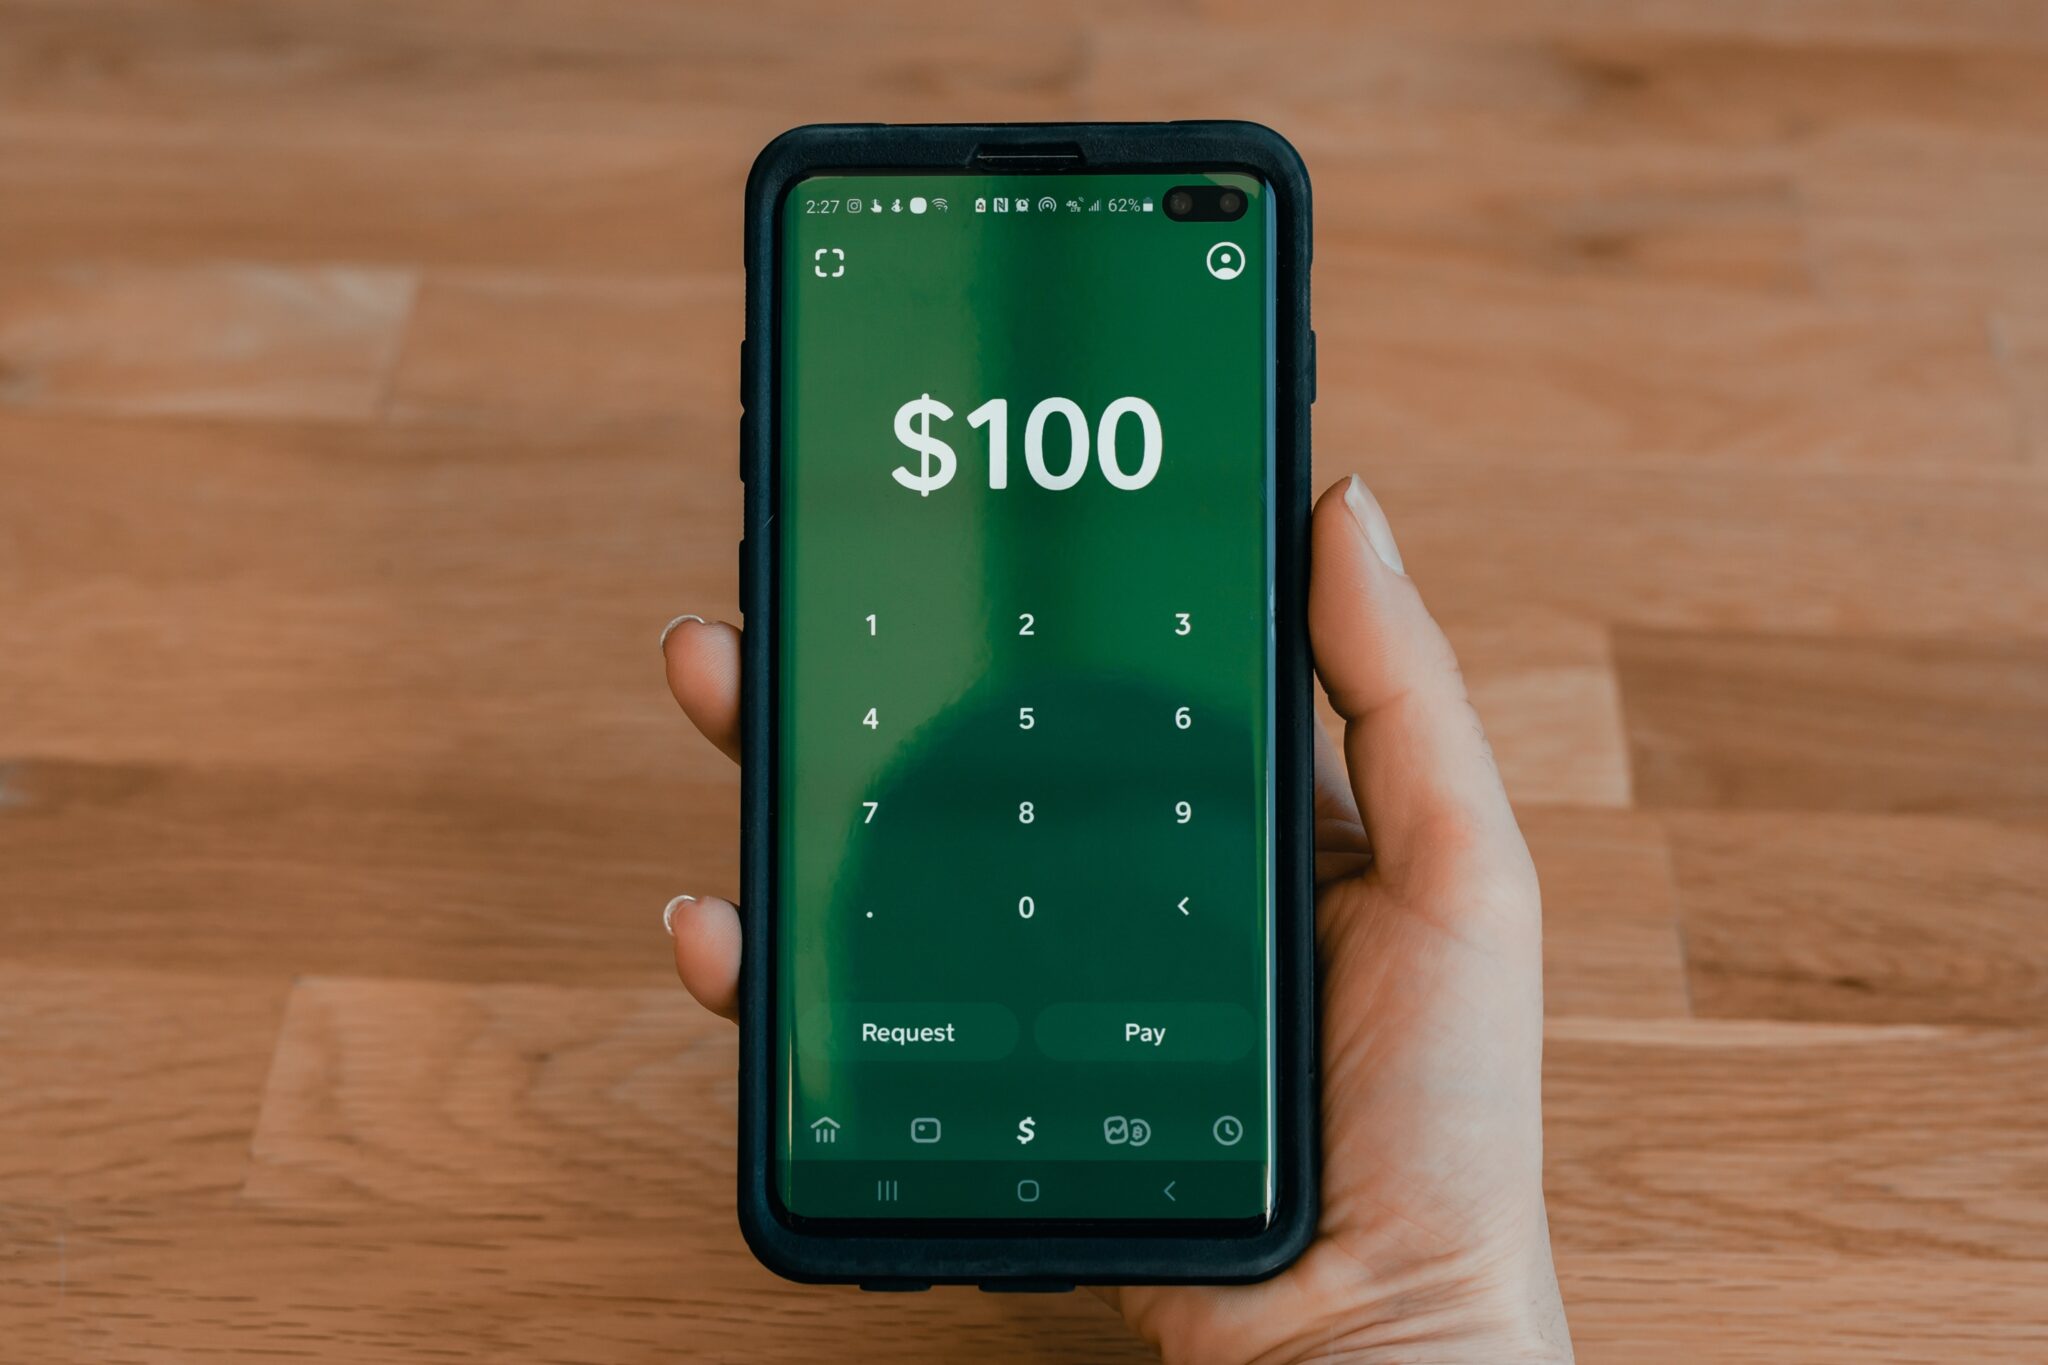 2. Common Cash App Glitches and How to Fix Them - wide 5